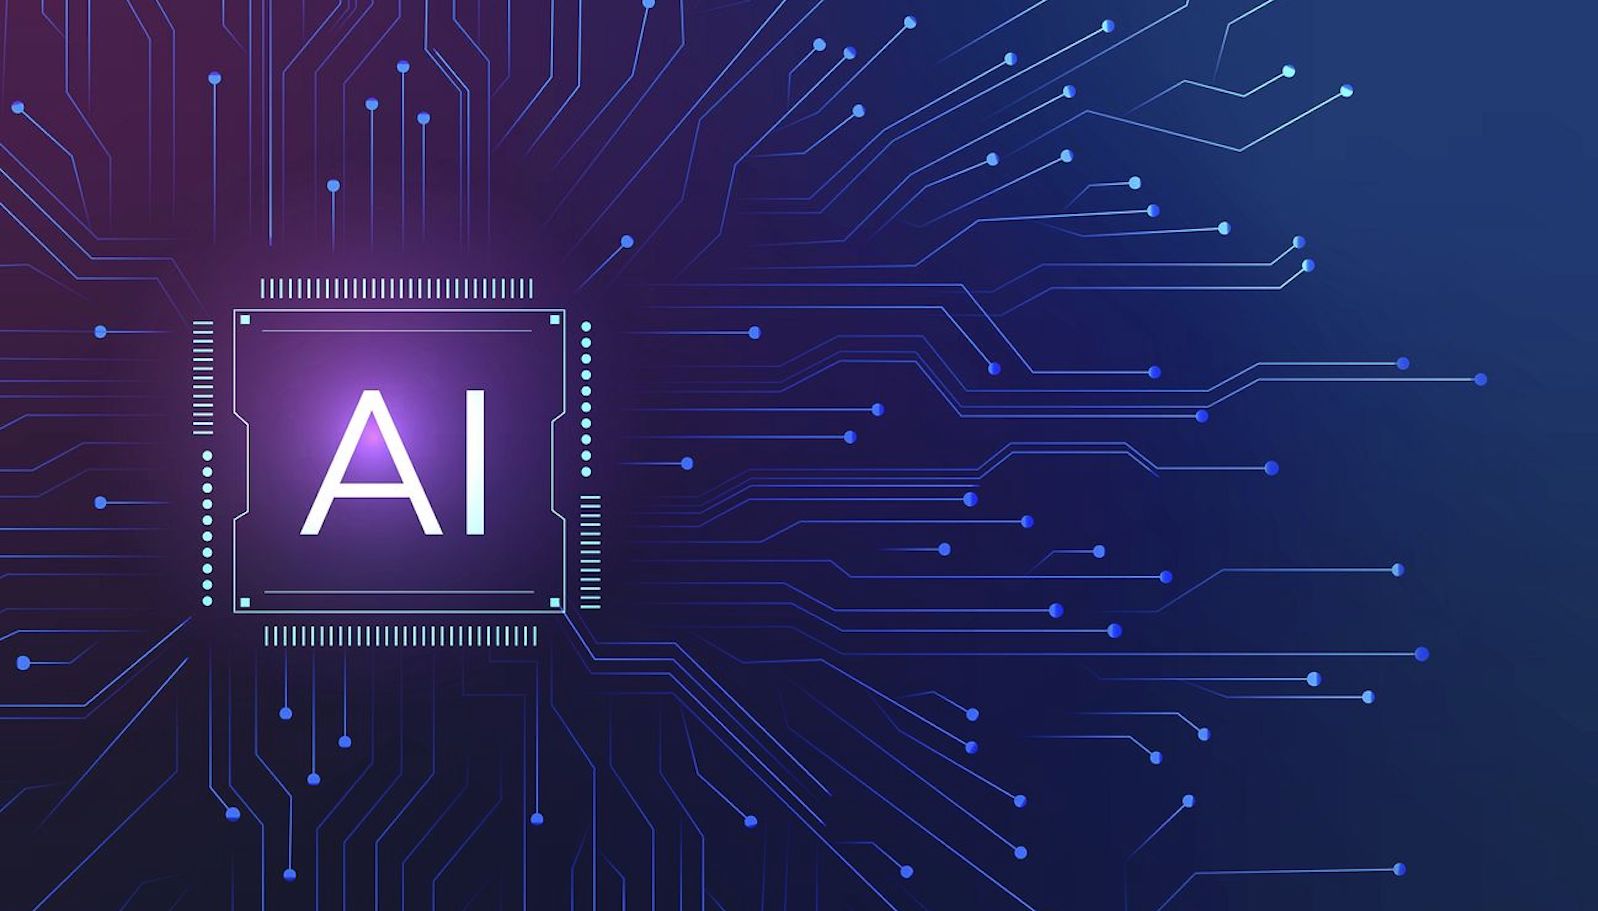 A computer chip that says "AI" against a purple and blue background with interconnected white lines